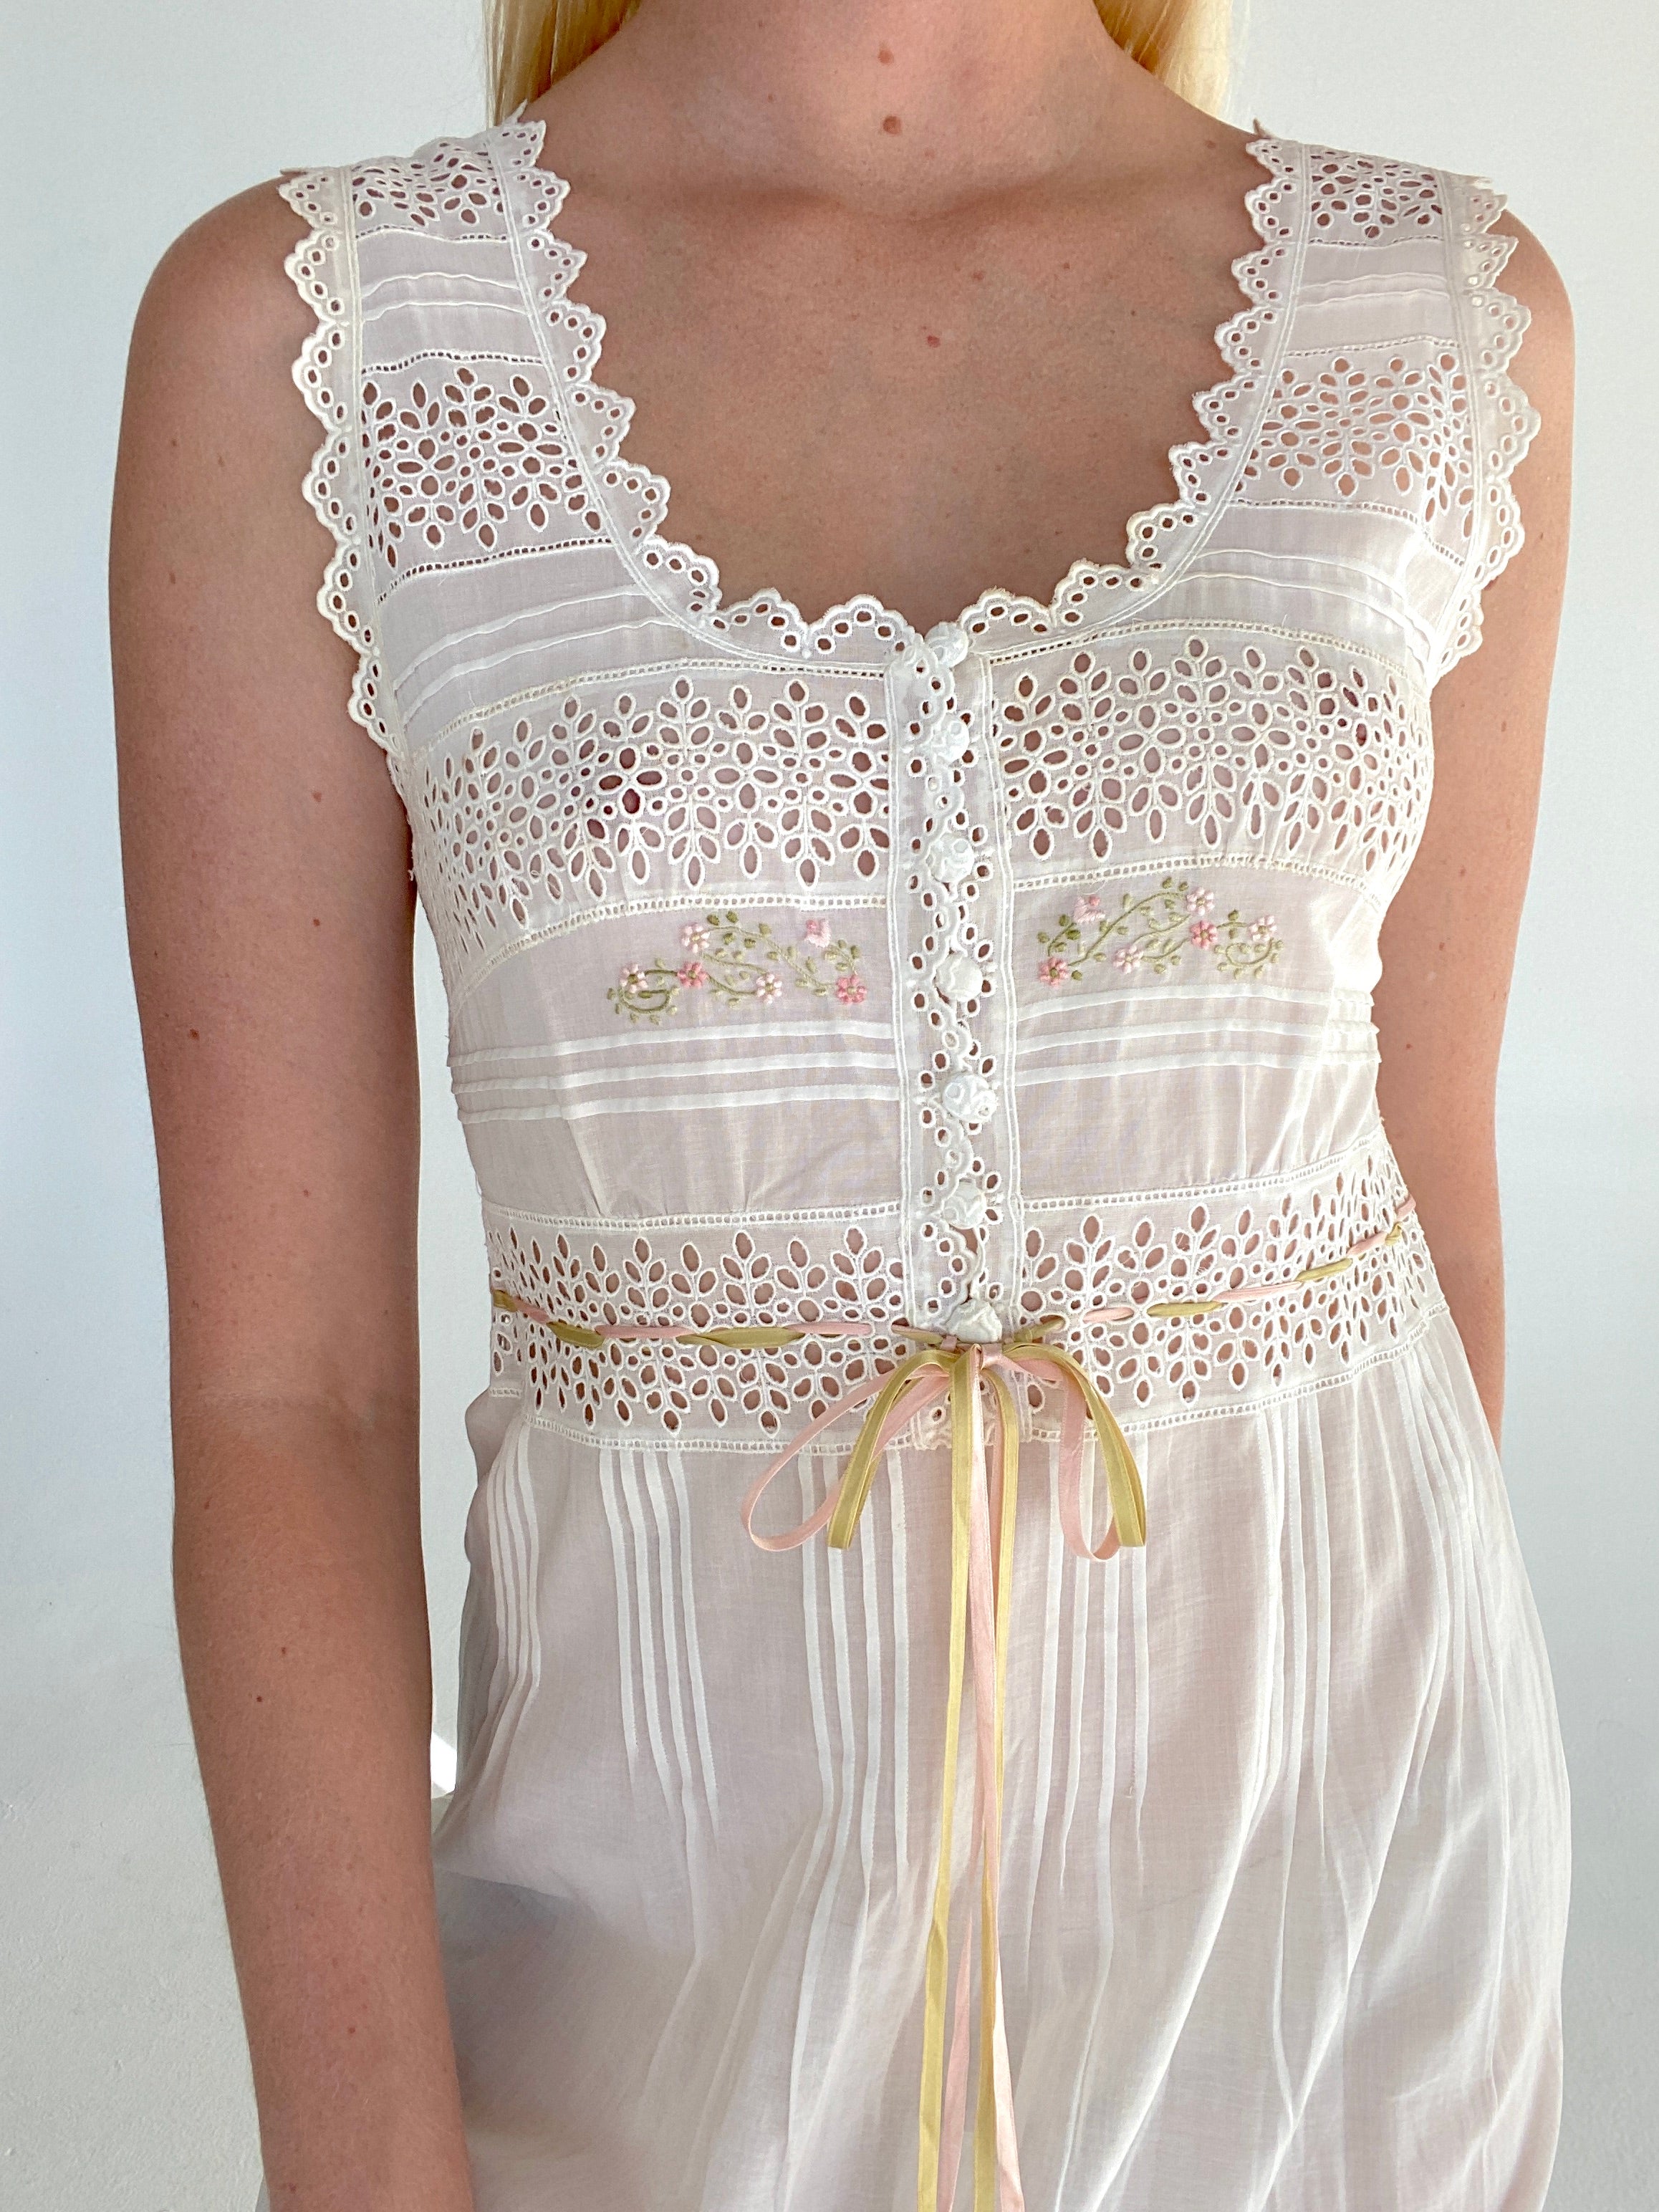 1940's White Cotton Dress with Eyelet and Floral Details